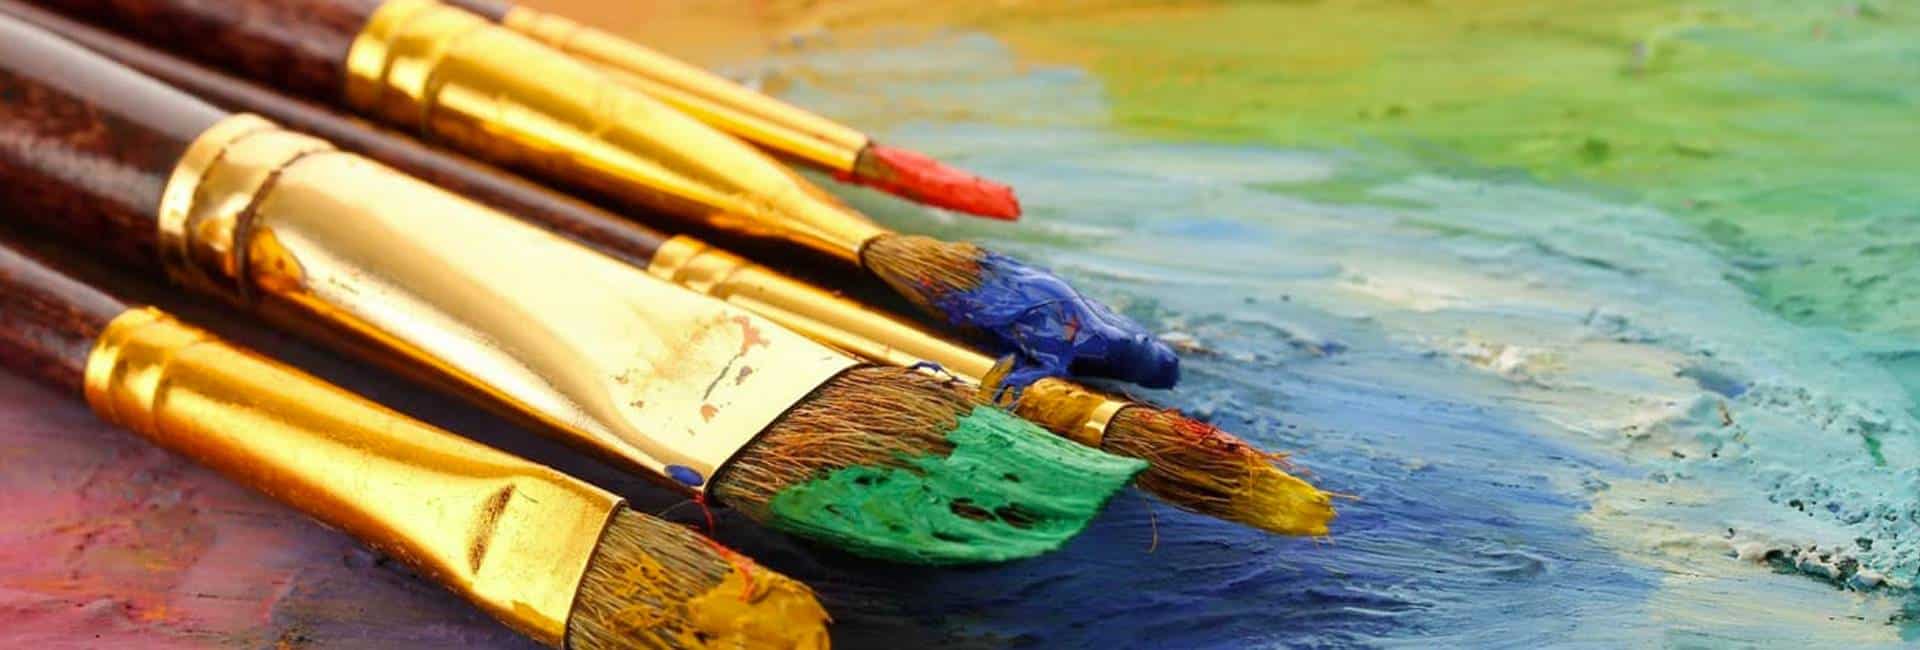 Paint brushes on colorful background